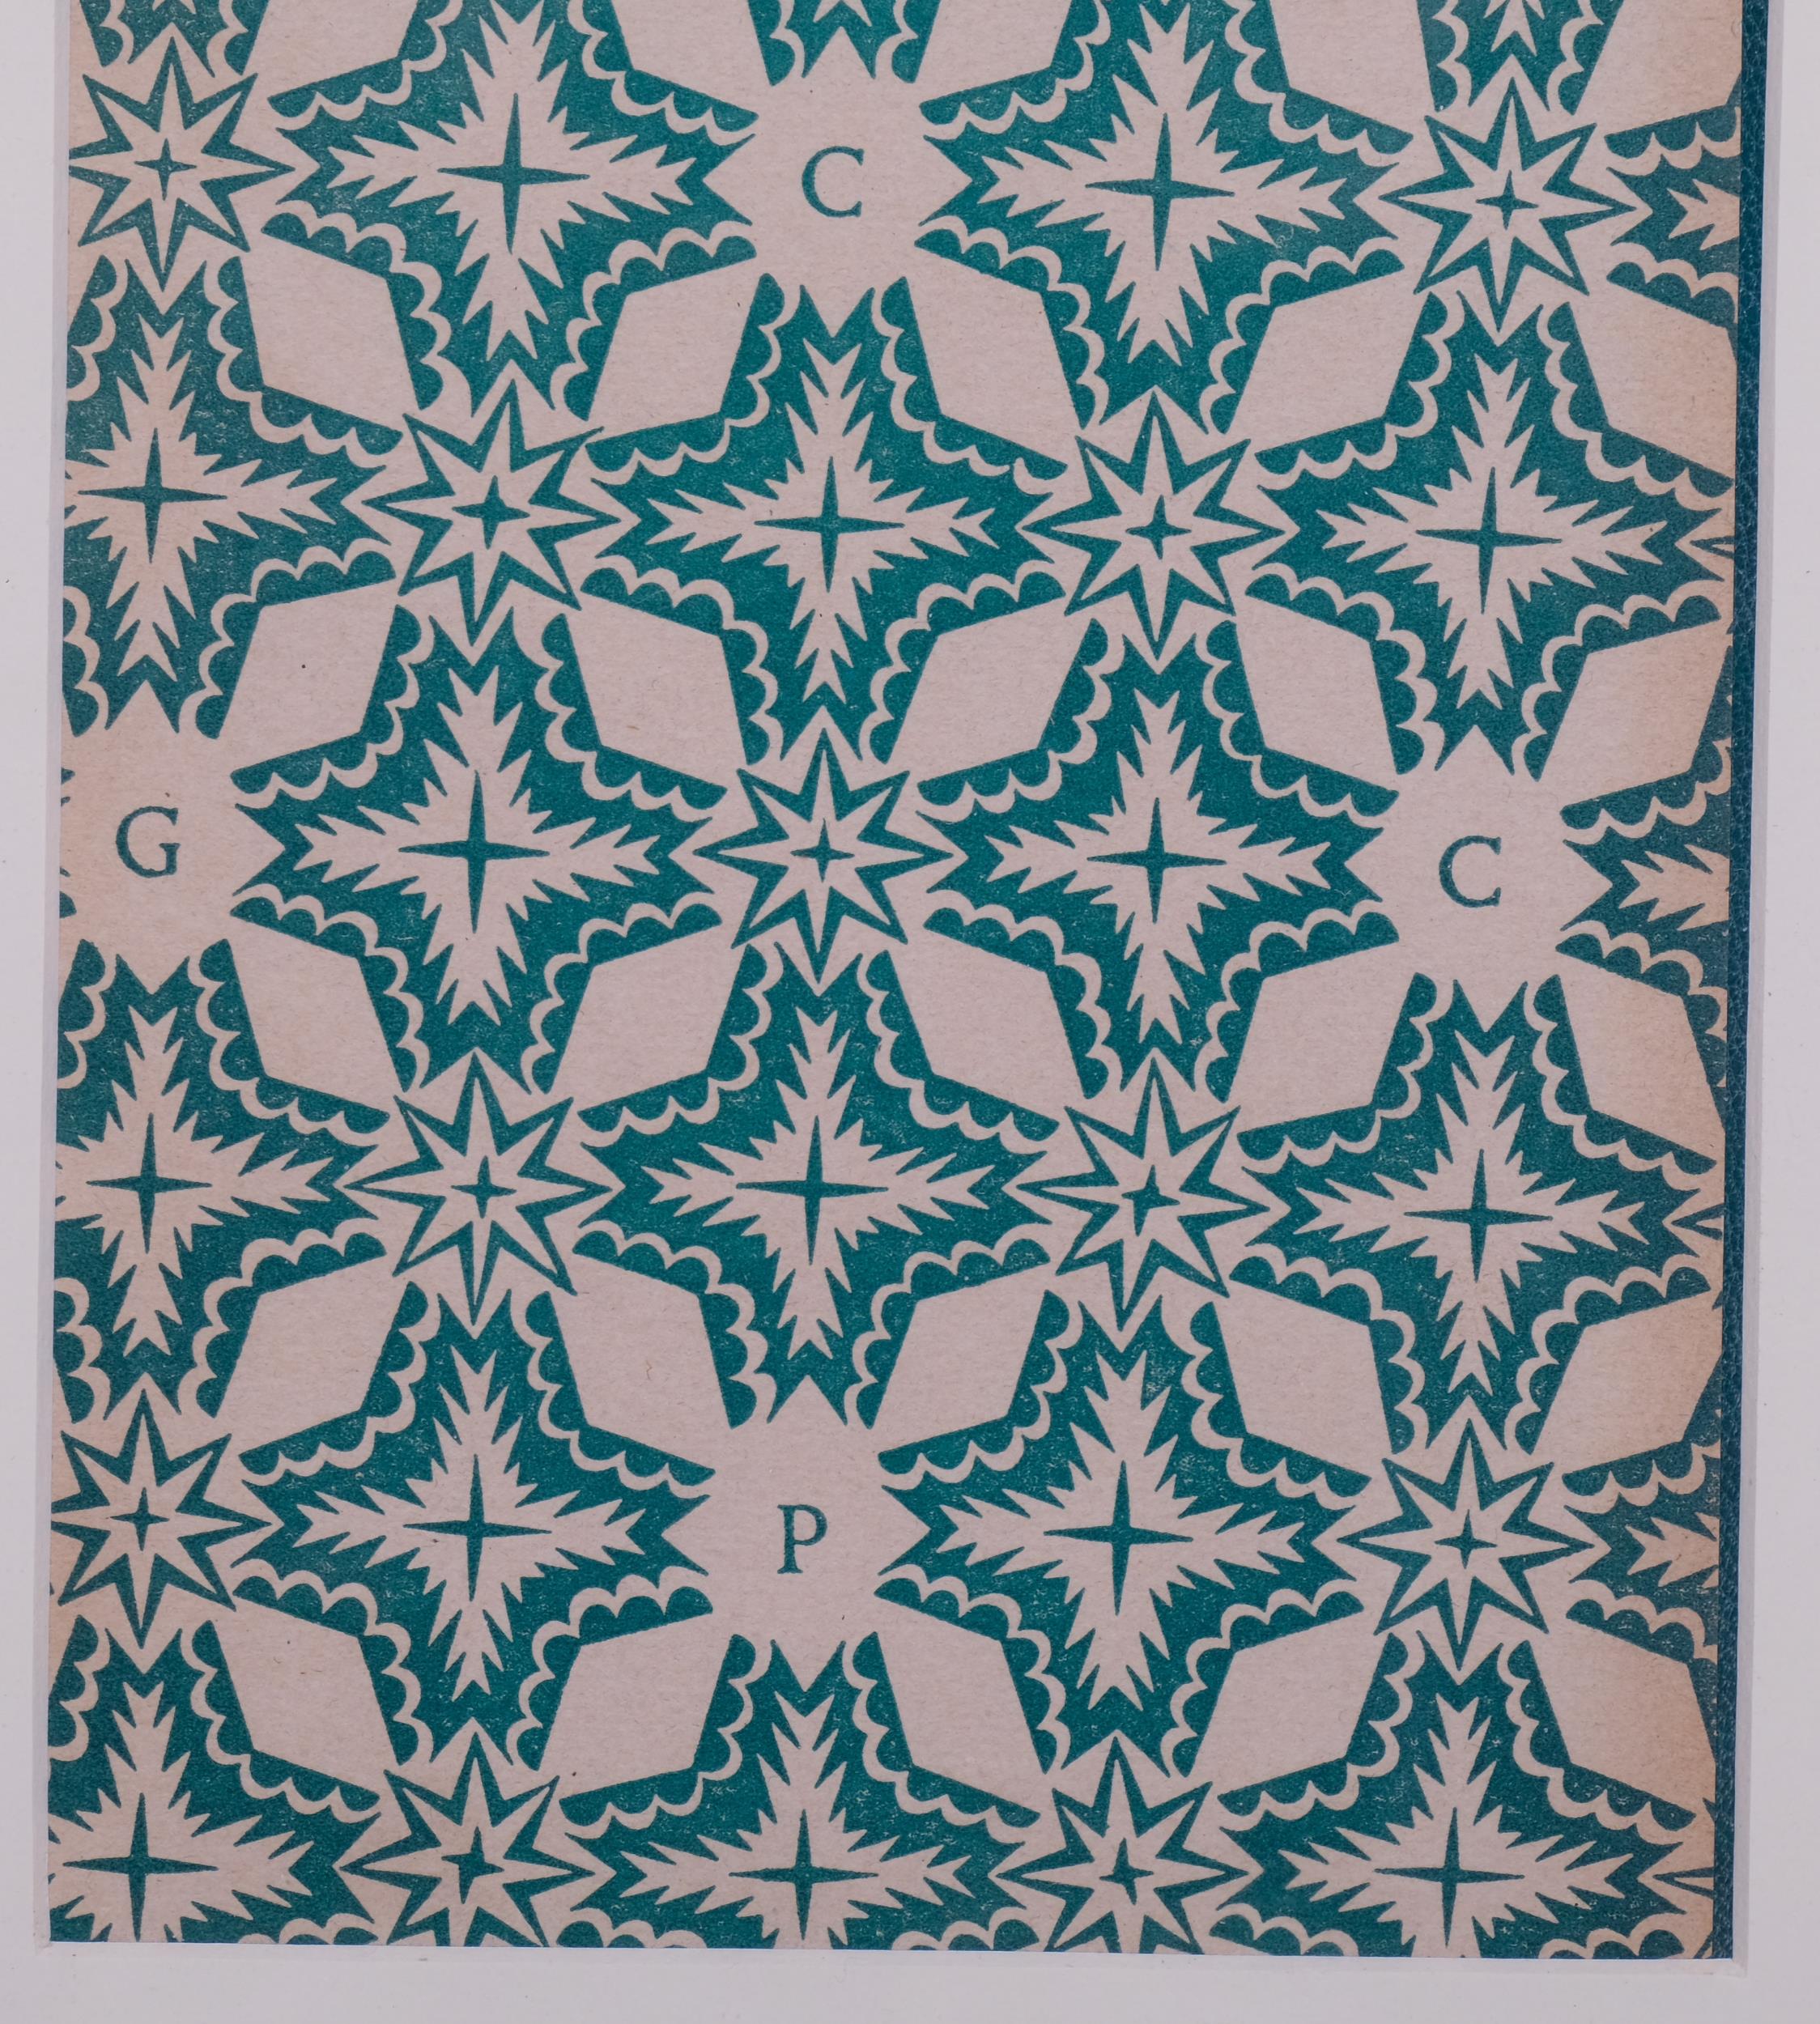 Tirzah Garwood (1908-1951), patterned paper print on board, Cover Design for The Hundredth Story, - Image 3 of 4